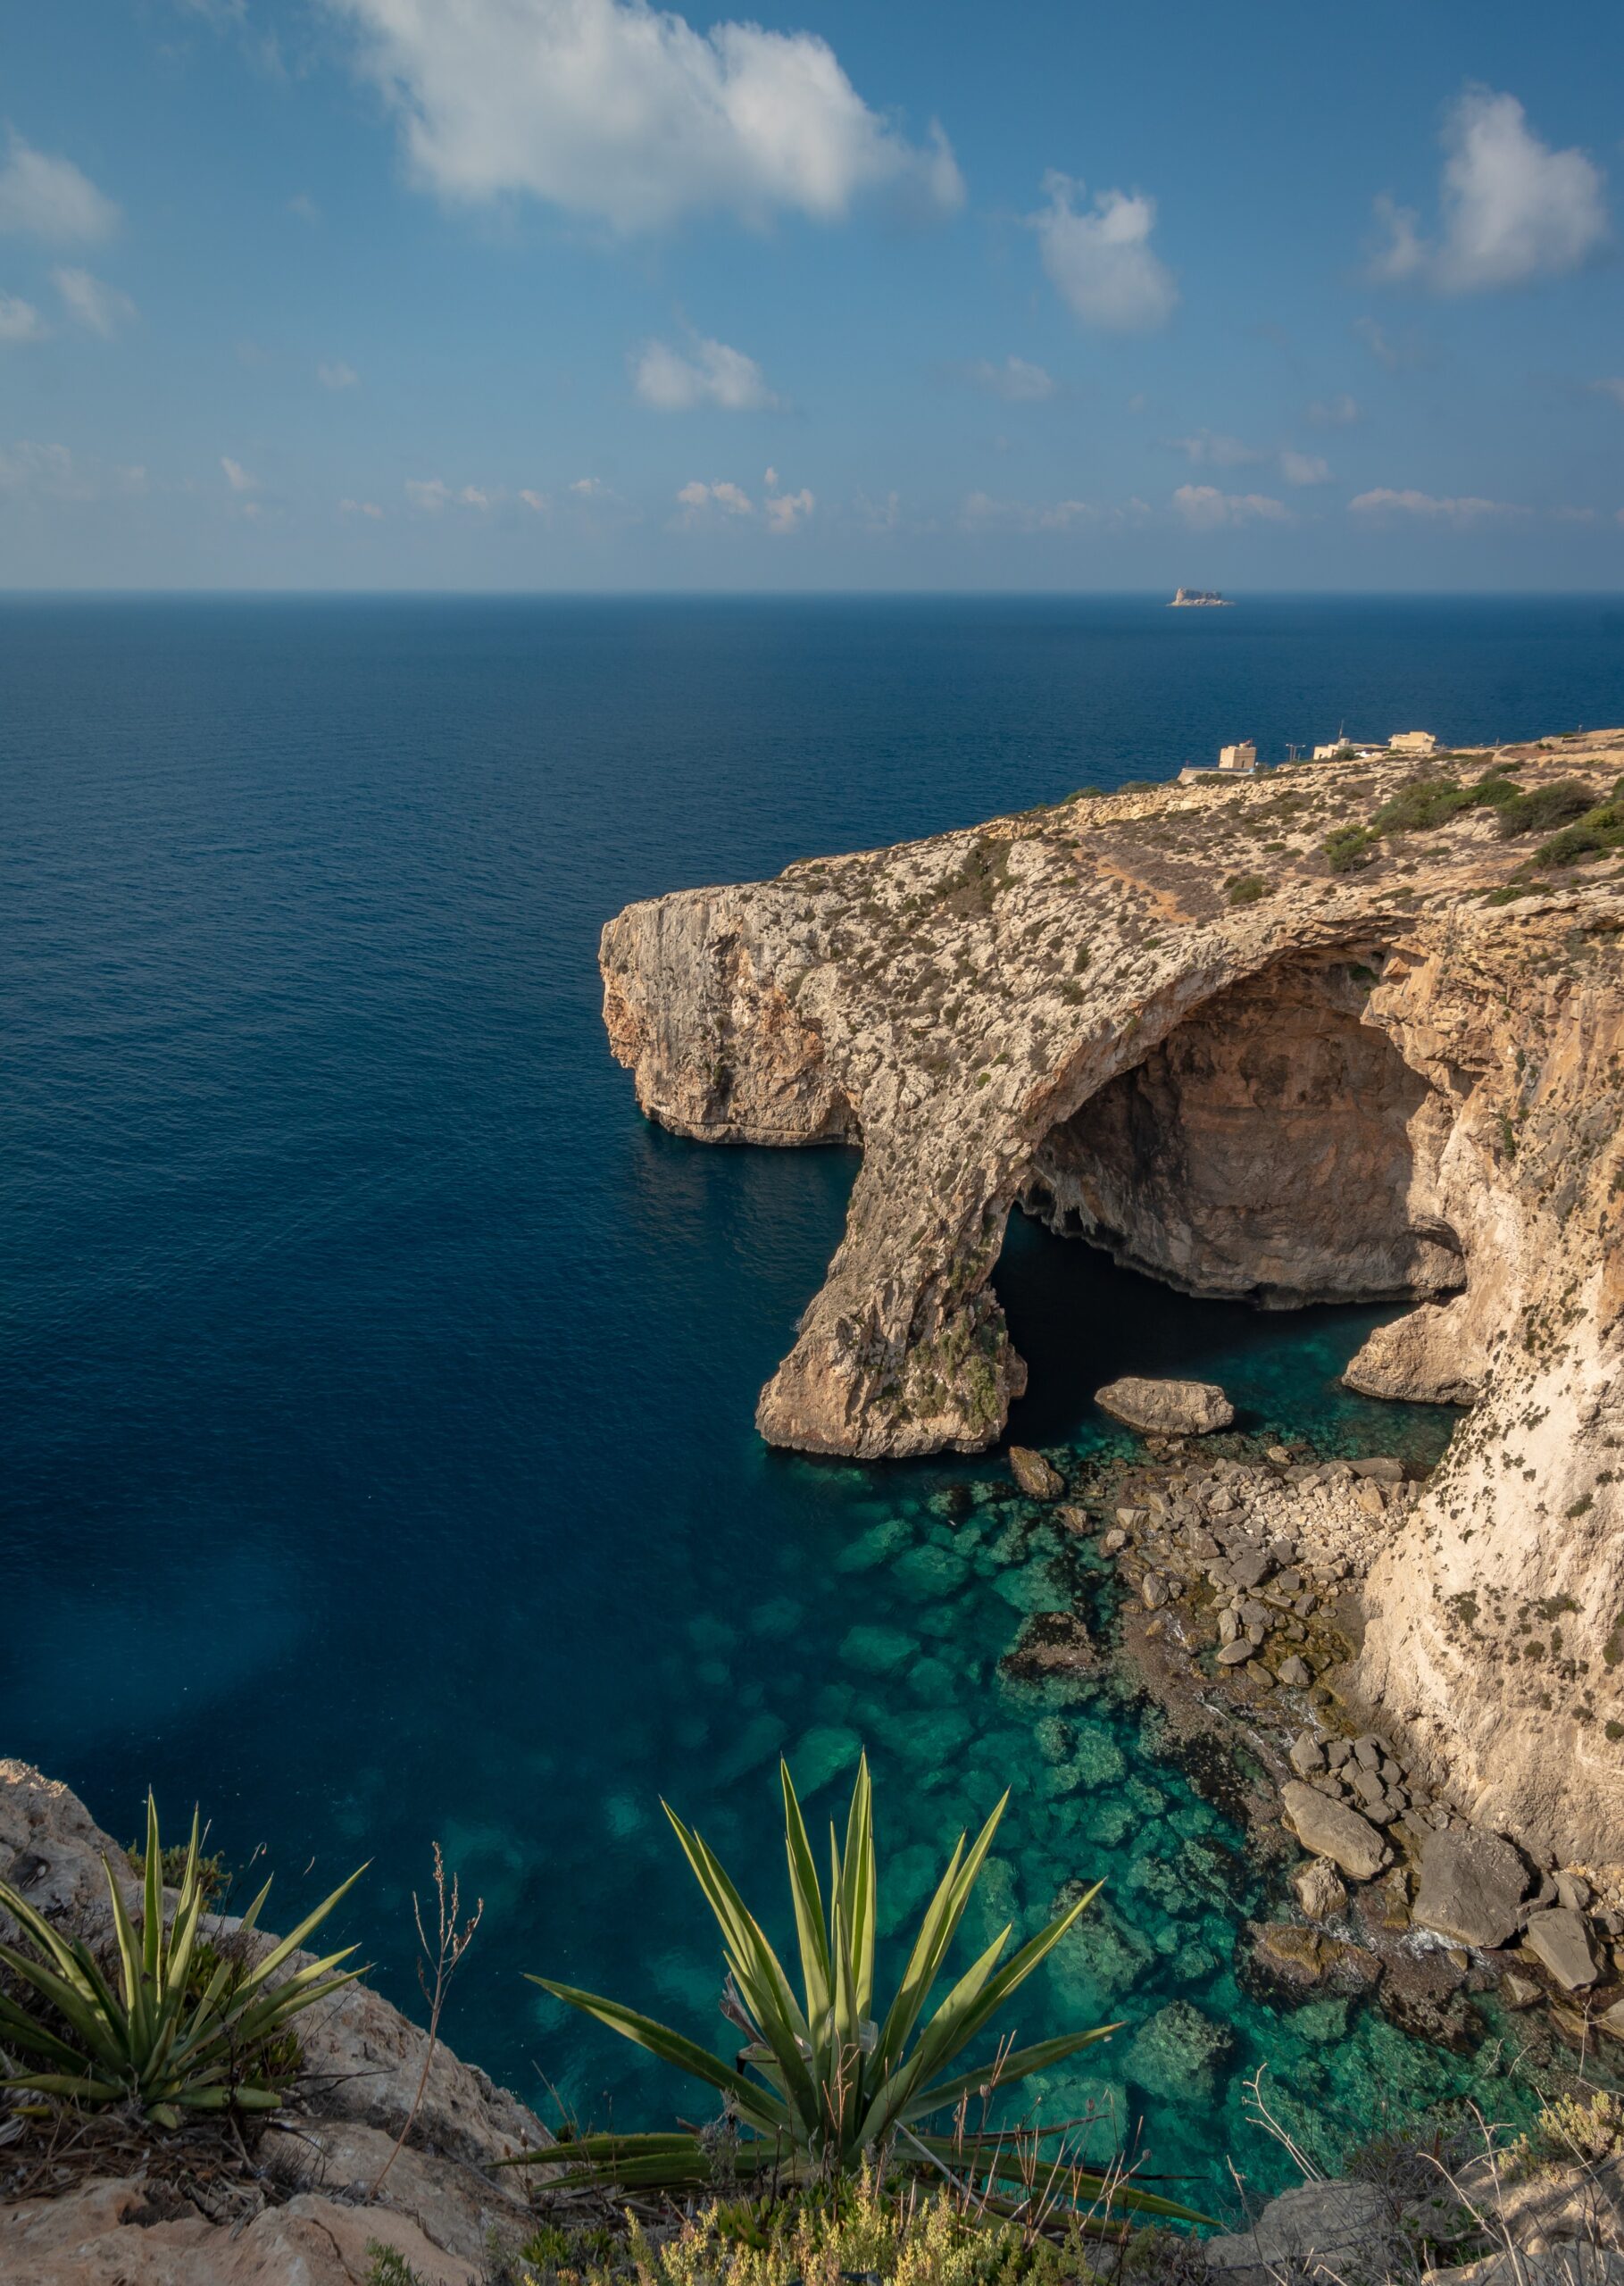 Discovering Malta’s Blue Grotto and Crystal-Clear Caves